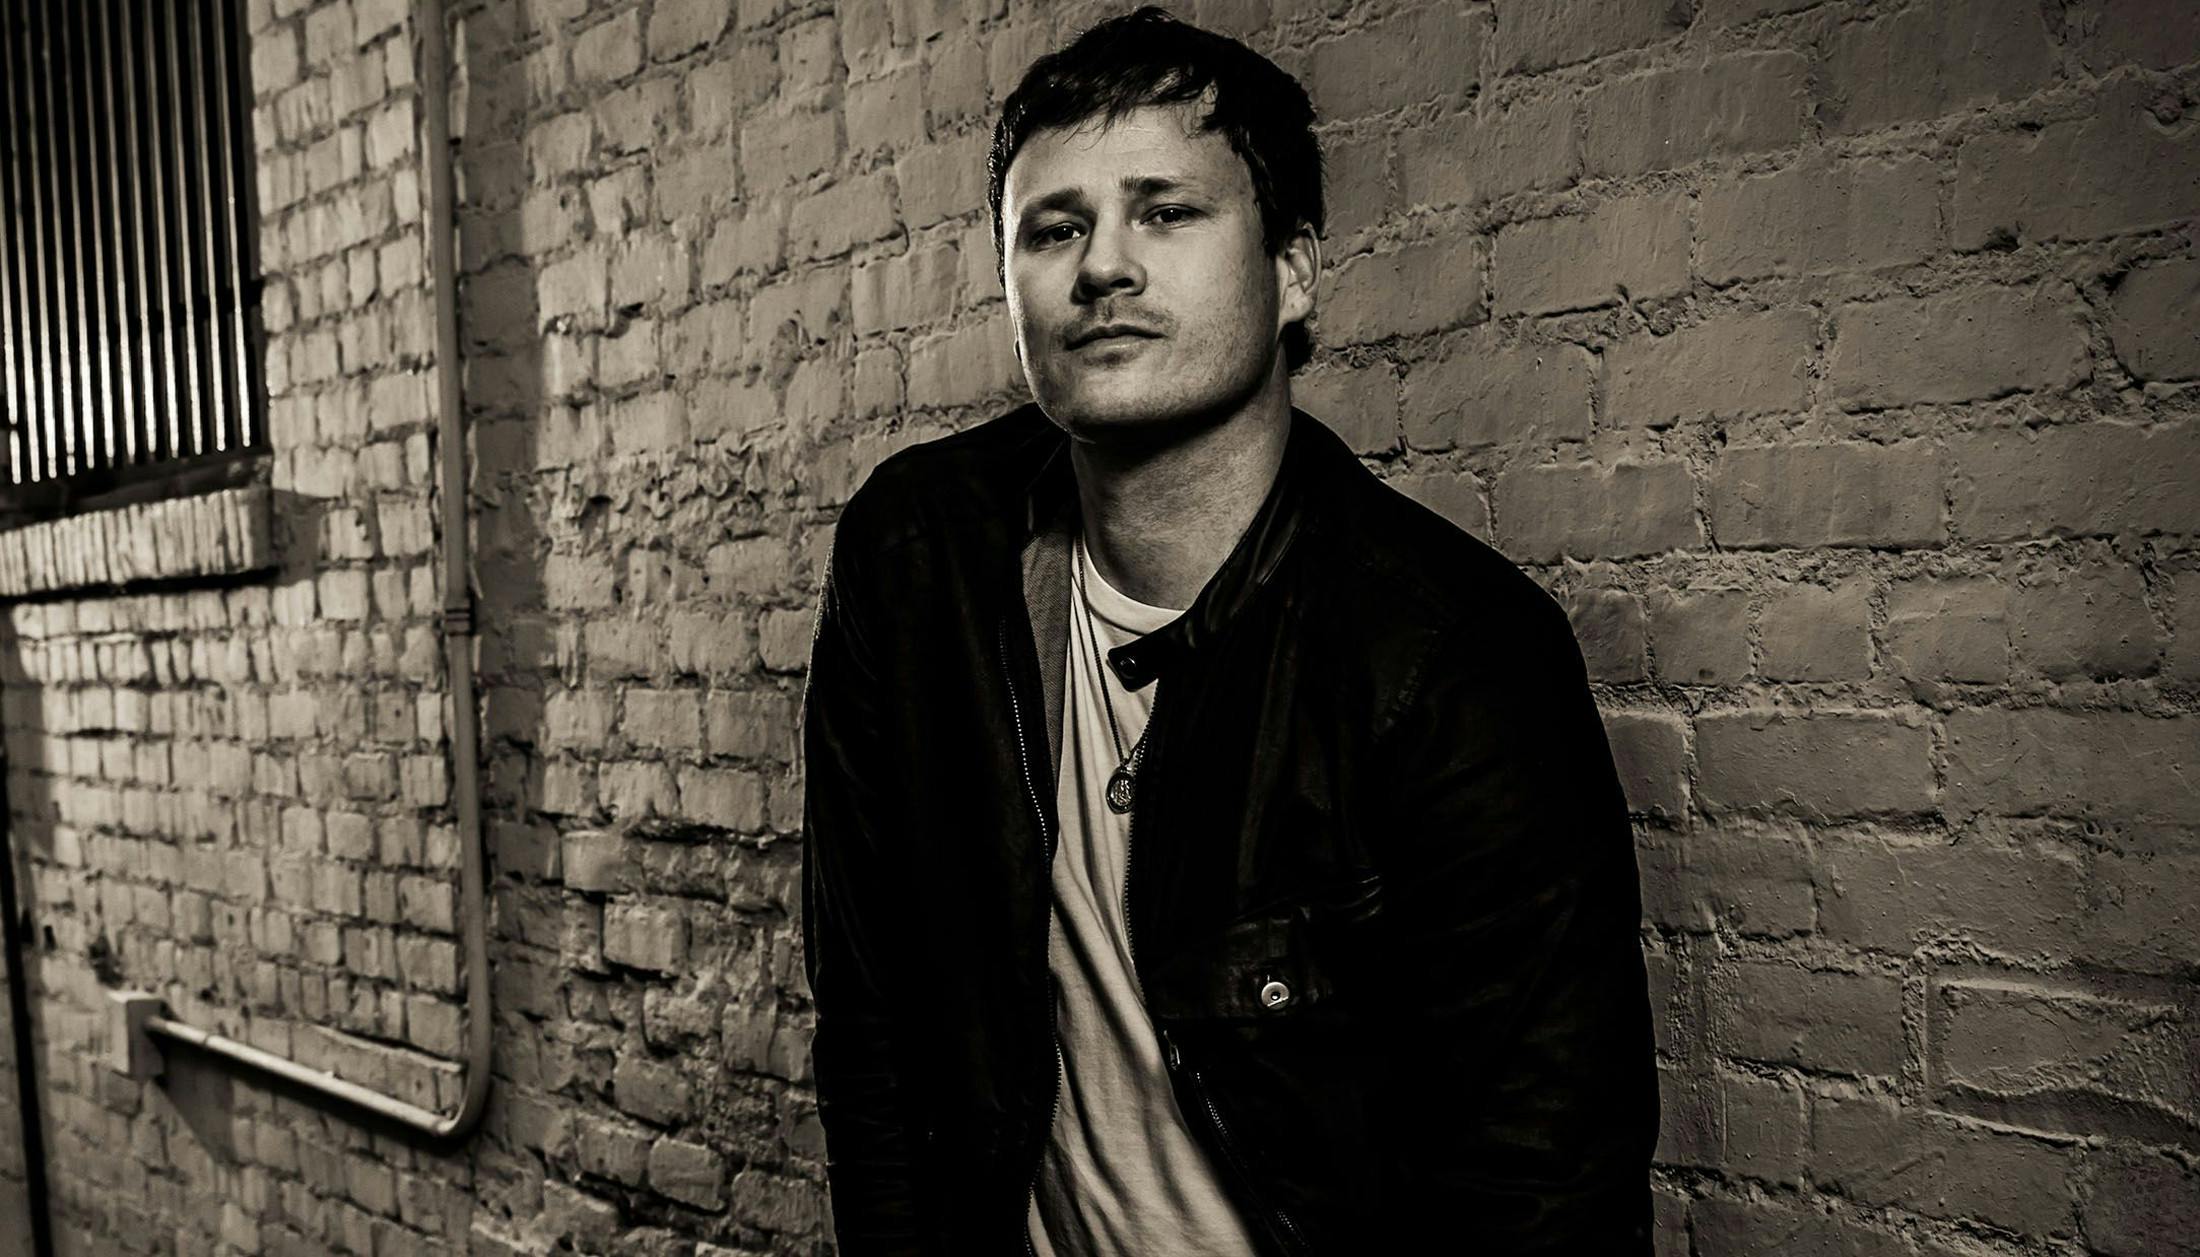 Tom DeLonge: "I've Been Gone From Music For A While – And I Feel That I Have A Lot To Say"